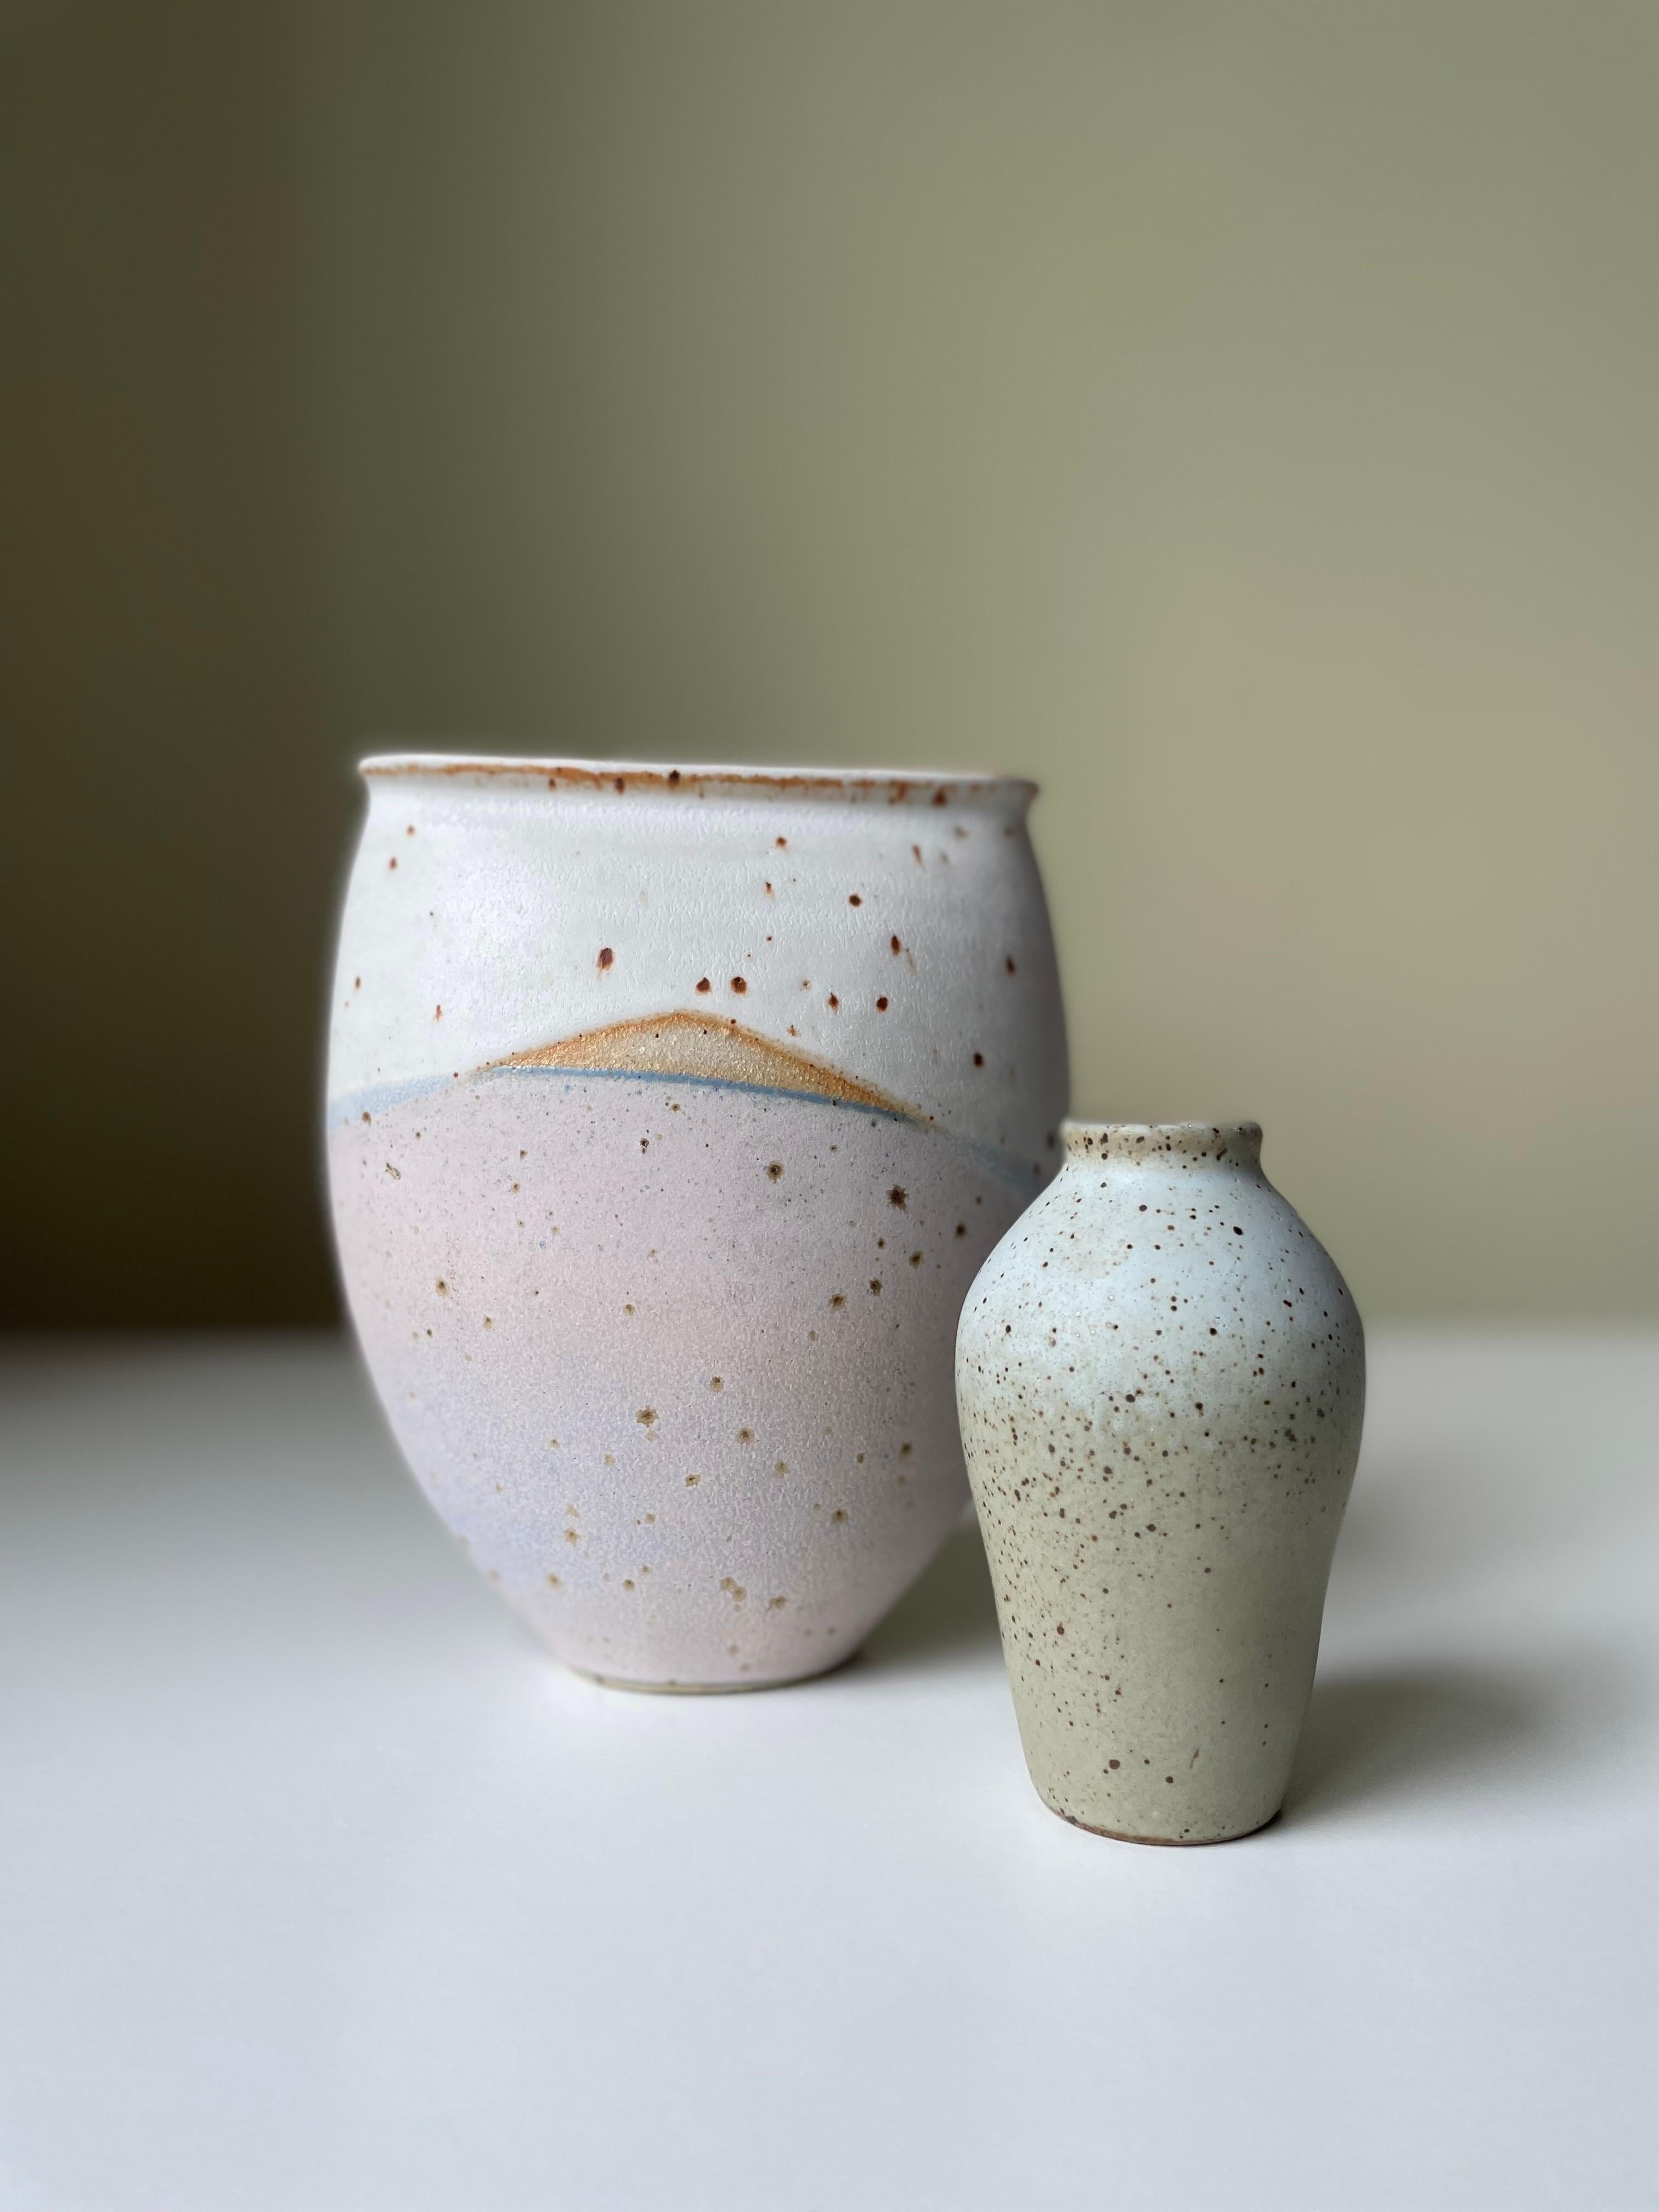 Set of two Scandinavian Modern light toned handmade soft shaped ceramic vases manufactured in Denmark in the 2000s. Large vase with organically lined dusty rose, light blue and chalk white matte glaze with brown accents. Small vase with light bluish